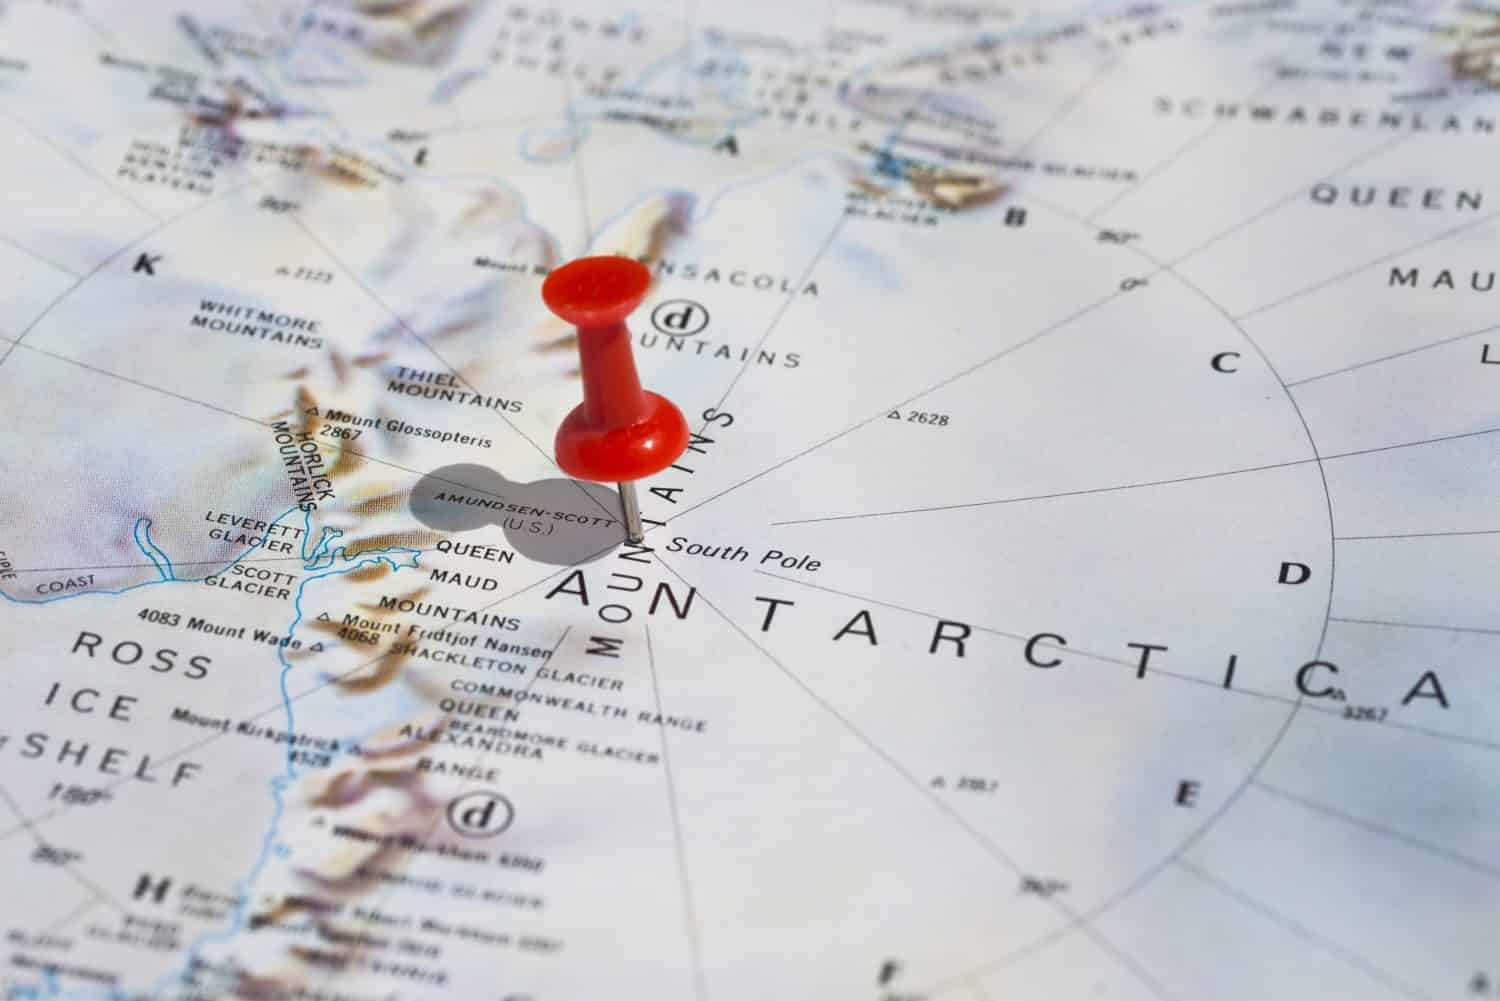 South Pole marked on map with red pushpin. Selective focus on the word South Pole and the pushpin. Pin is in an angle and casts some shadow to the left. 